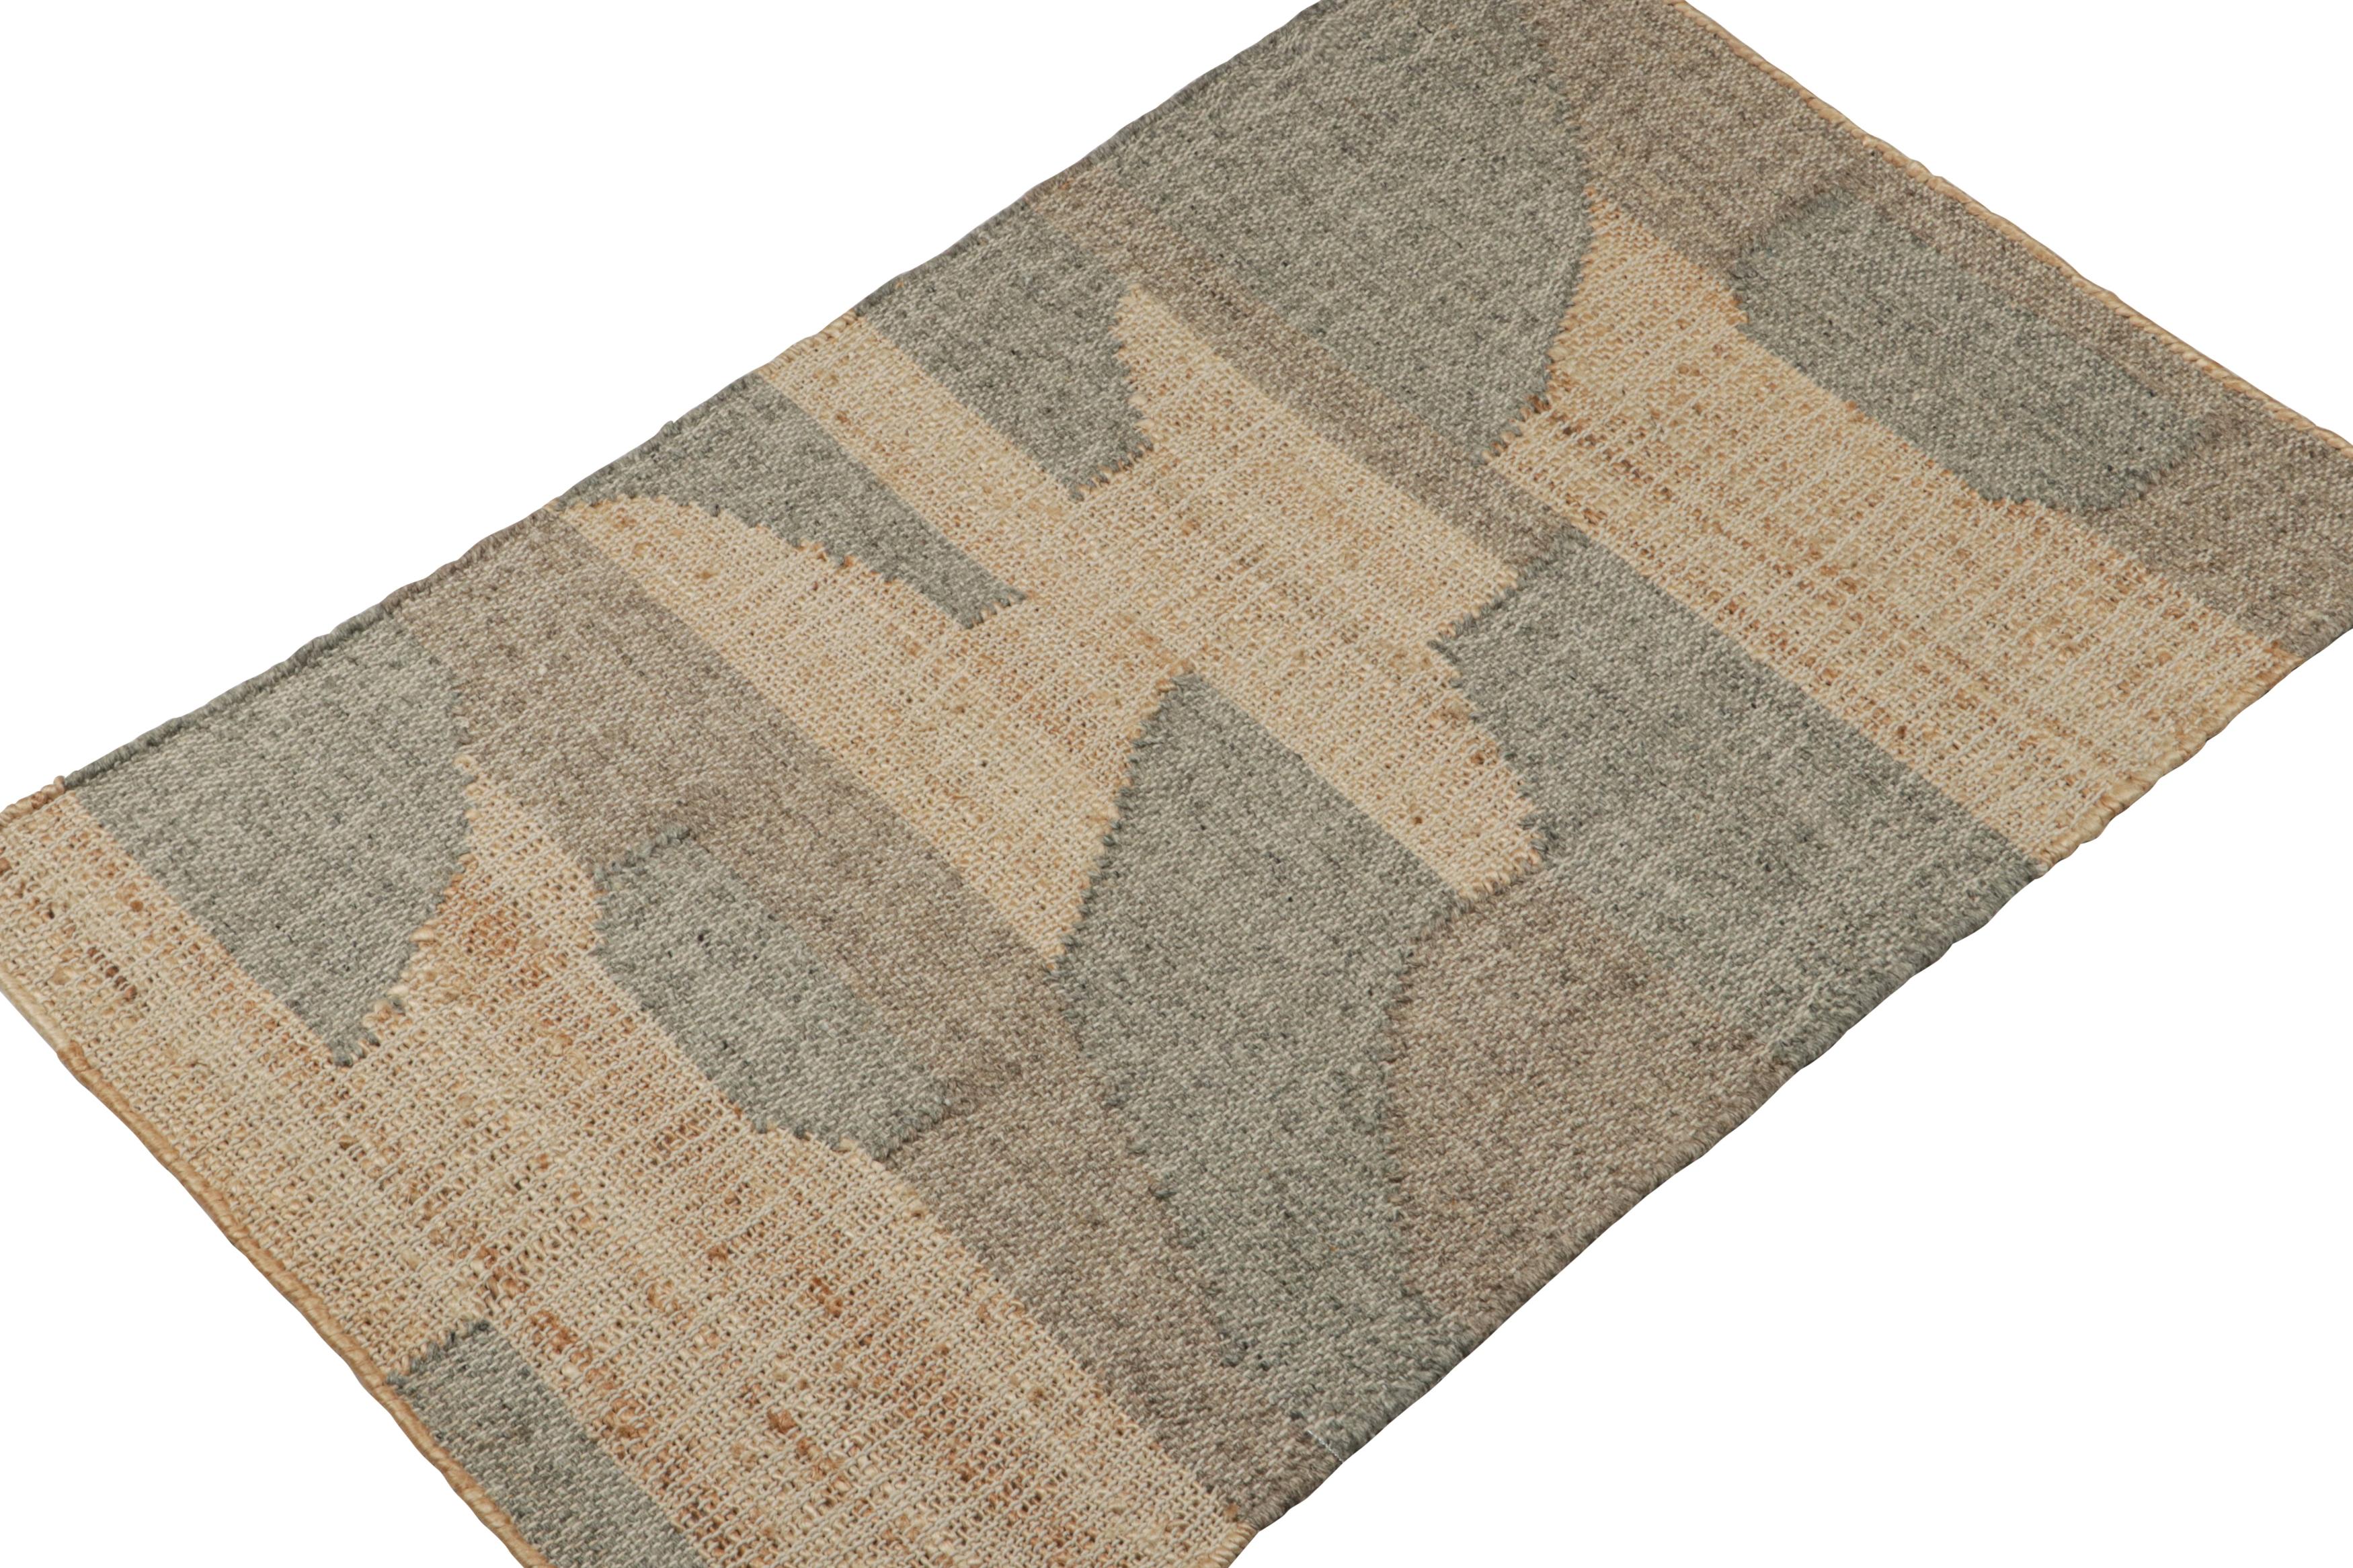 This 2x3 rug is a bold new addition to the flatweave collection by Rug & Kilim.  

On the Design: 

Handwoven in jute, wool & cotton, this contemporary kilim carries geometric patterns in beige-brown and grey. Further enjoying a durable body, an all